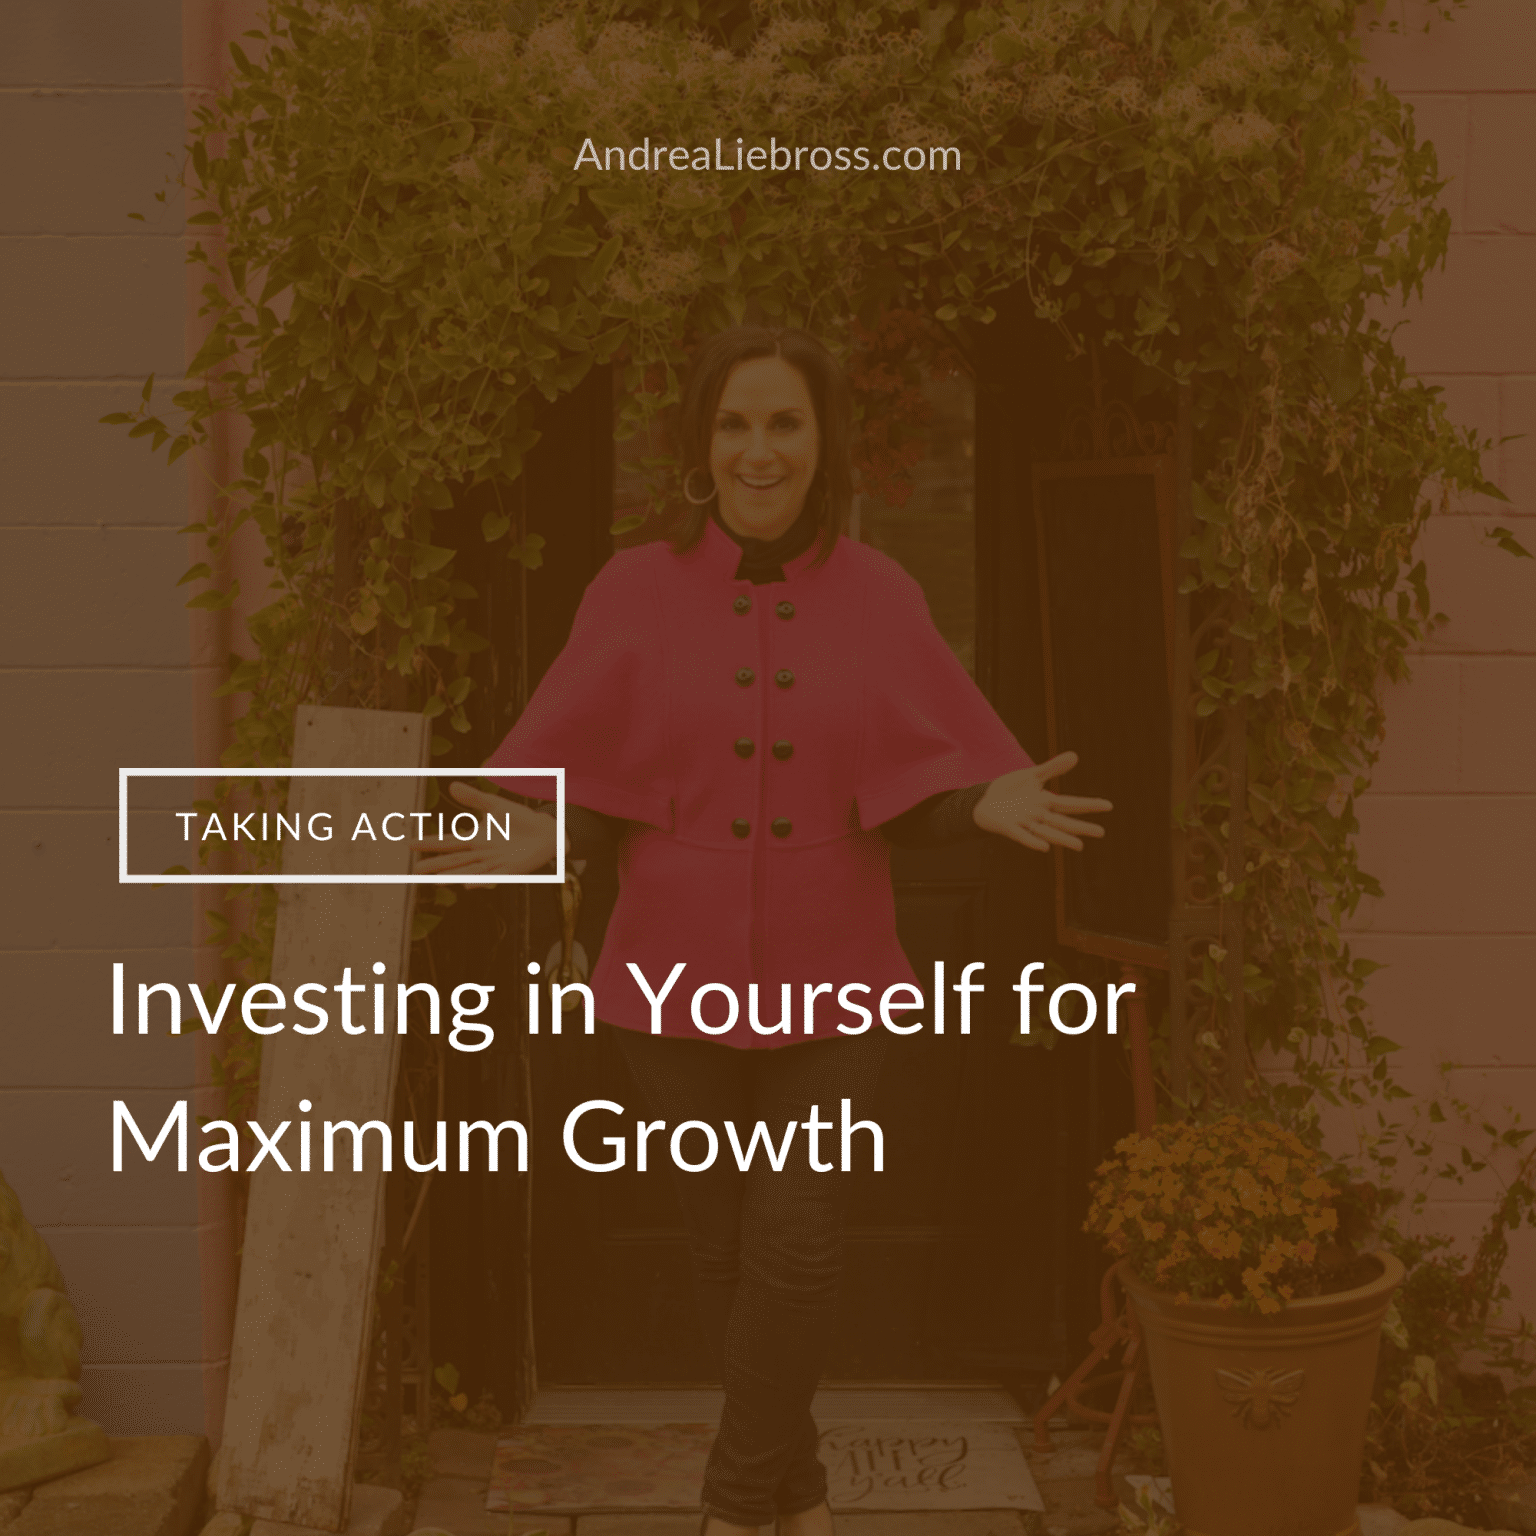 How to Invest in Yourself for Maximum Growth